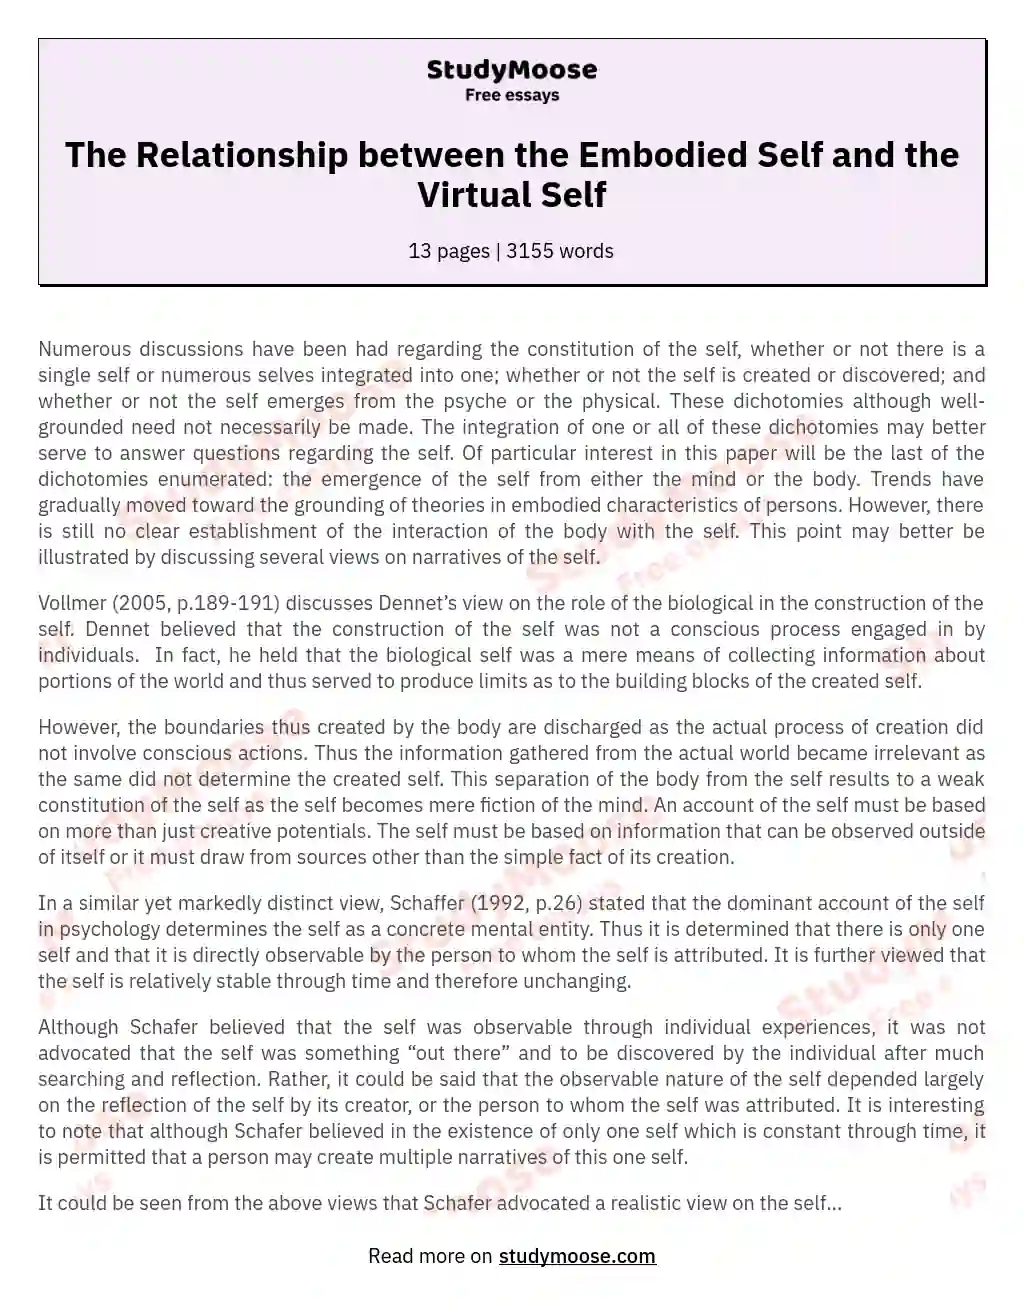 The Relationship between the Embodied Self and the Virtual Self essay